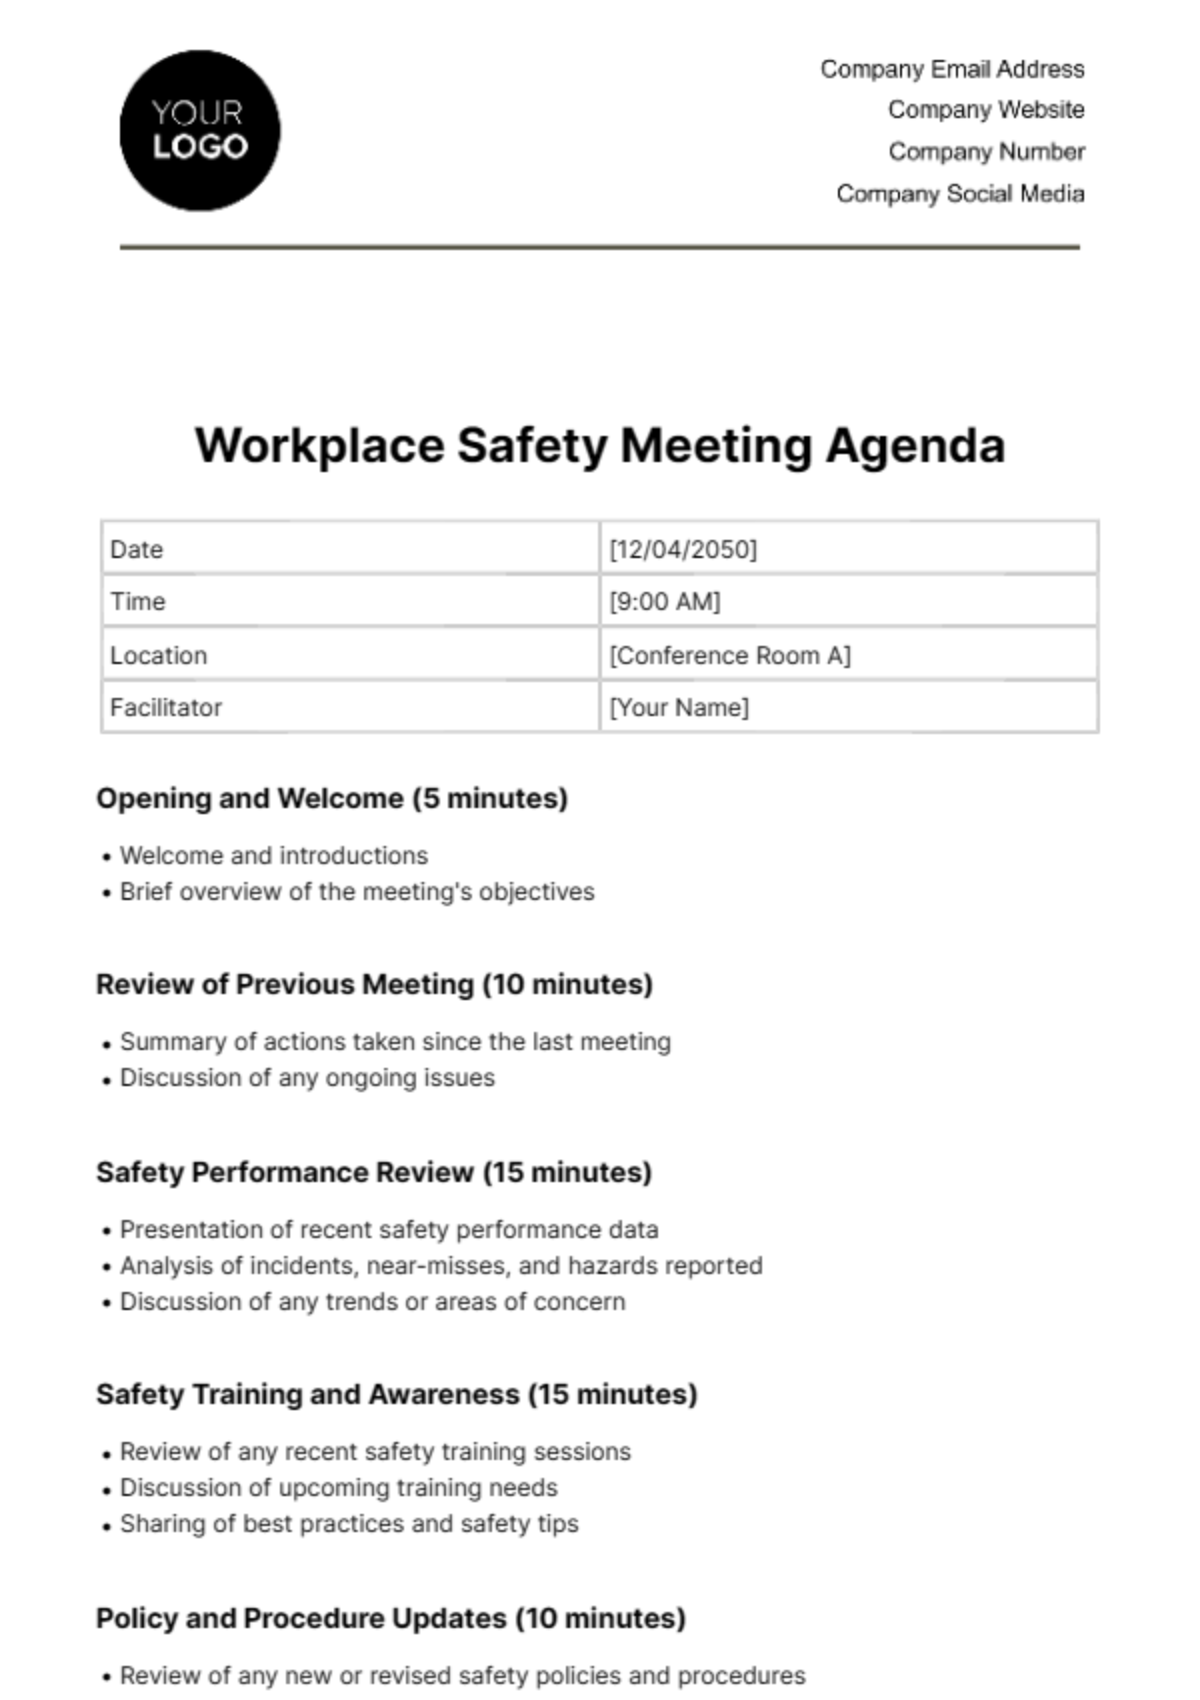 Free Workplace Safety Meeting Agenda Template